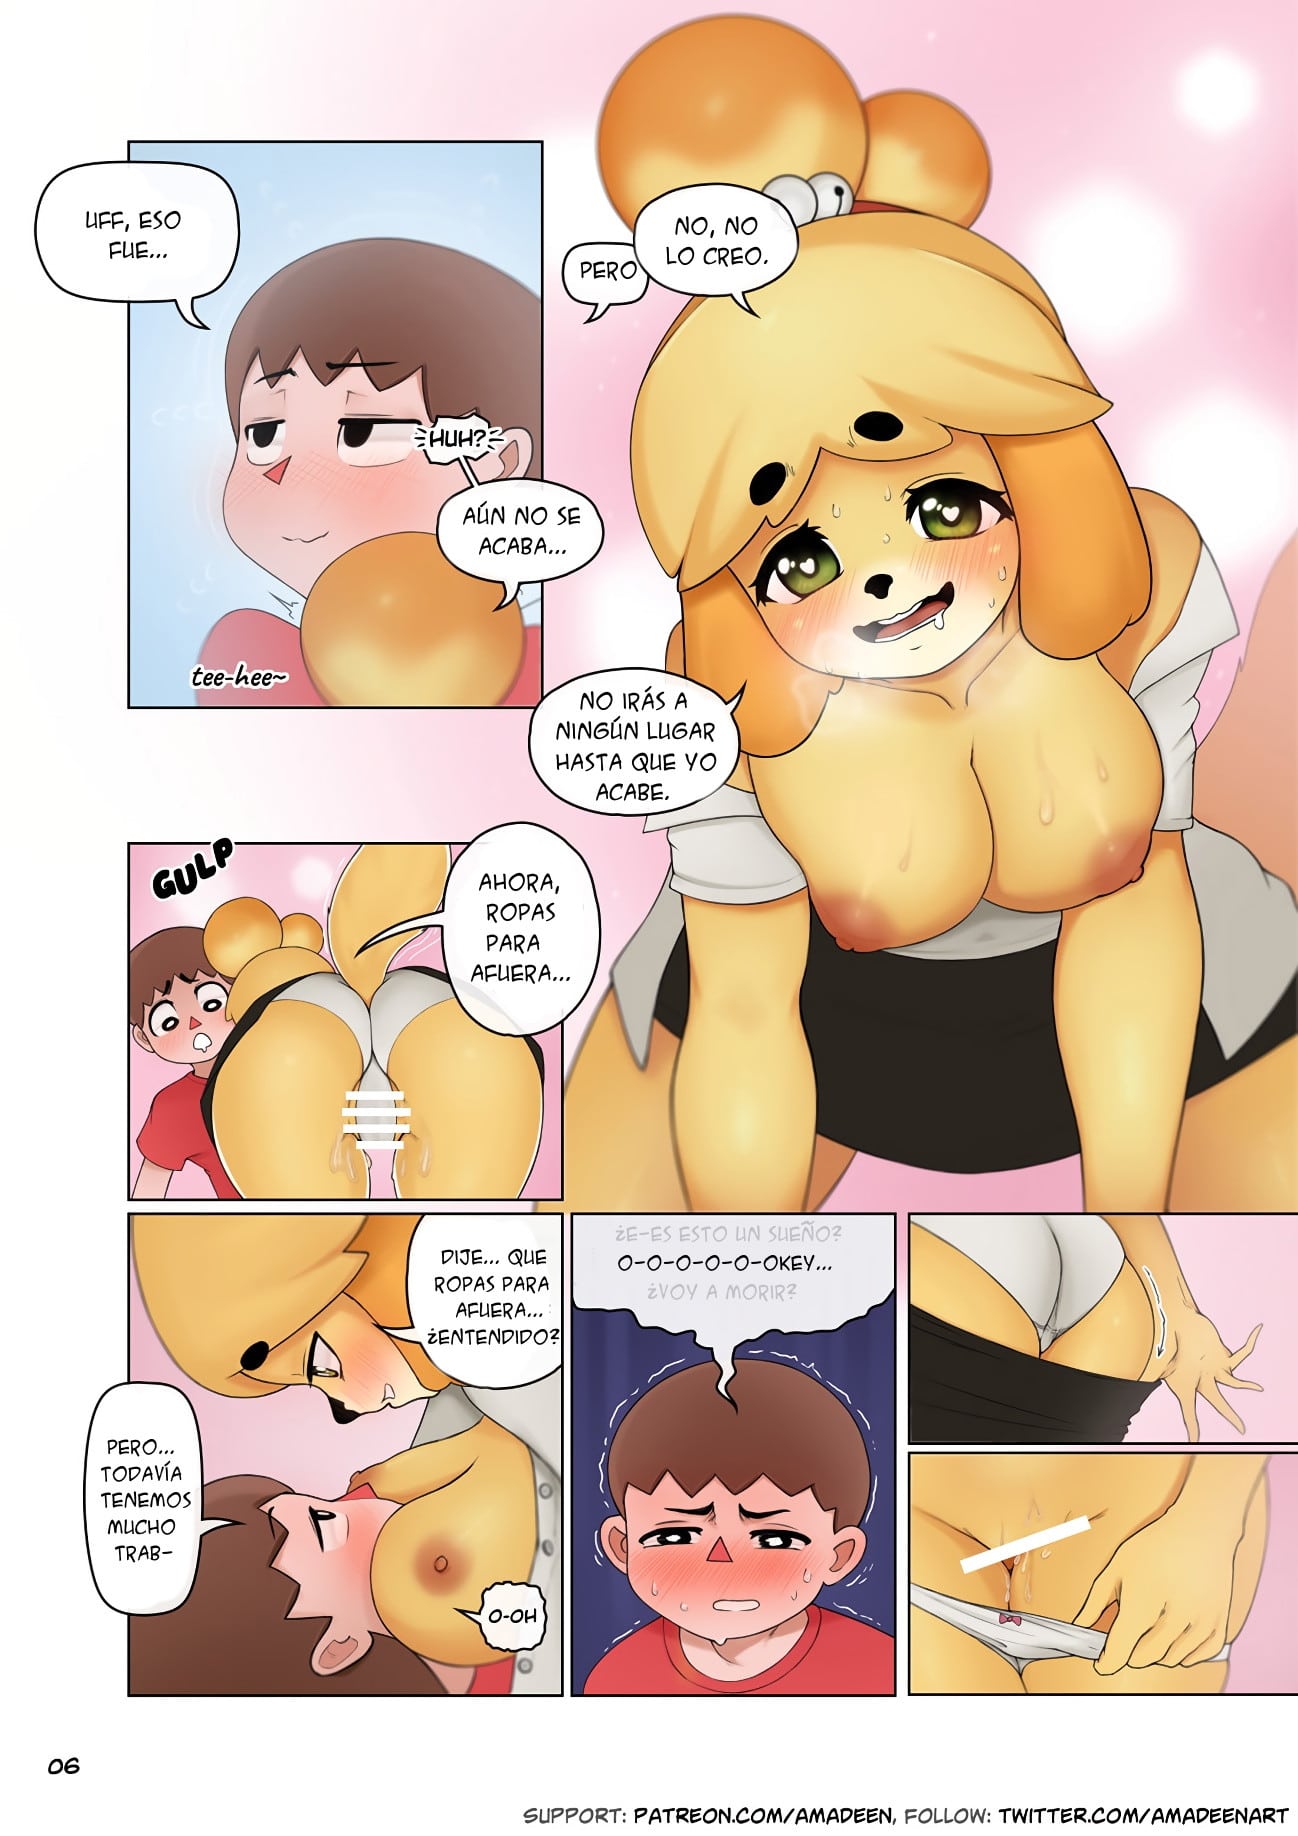 Isabelle’s Lunch Incident - 6